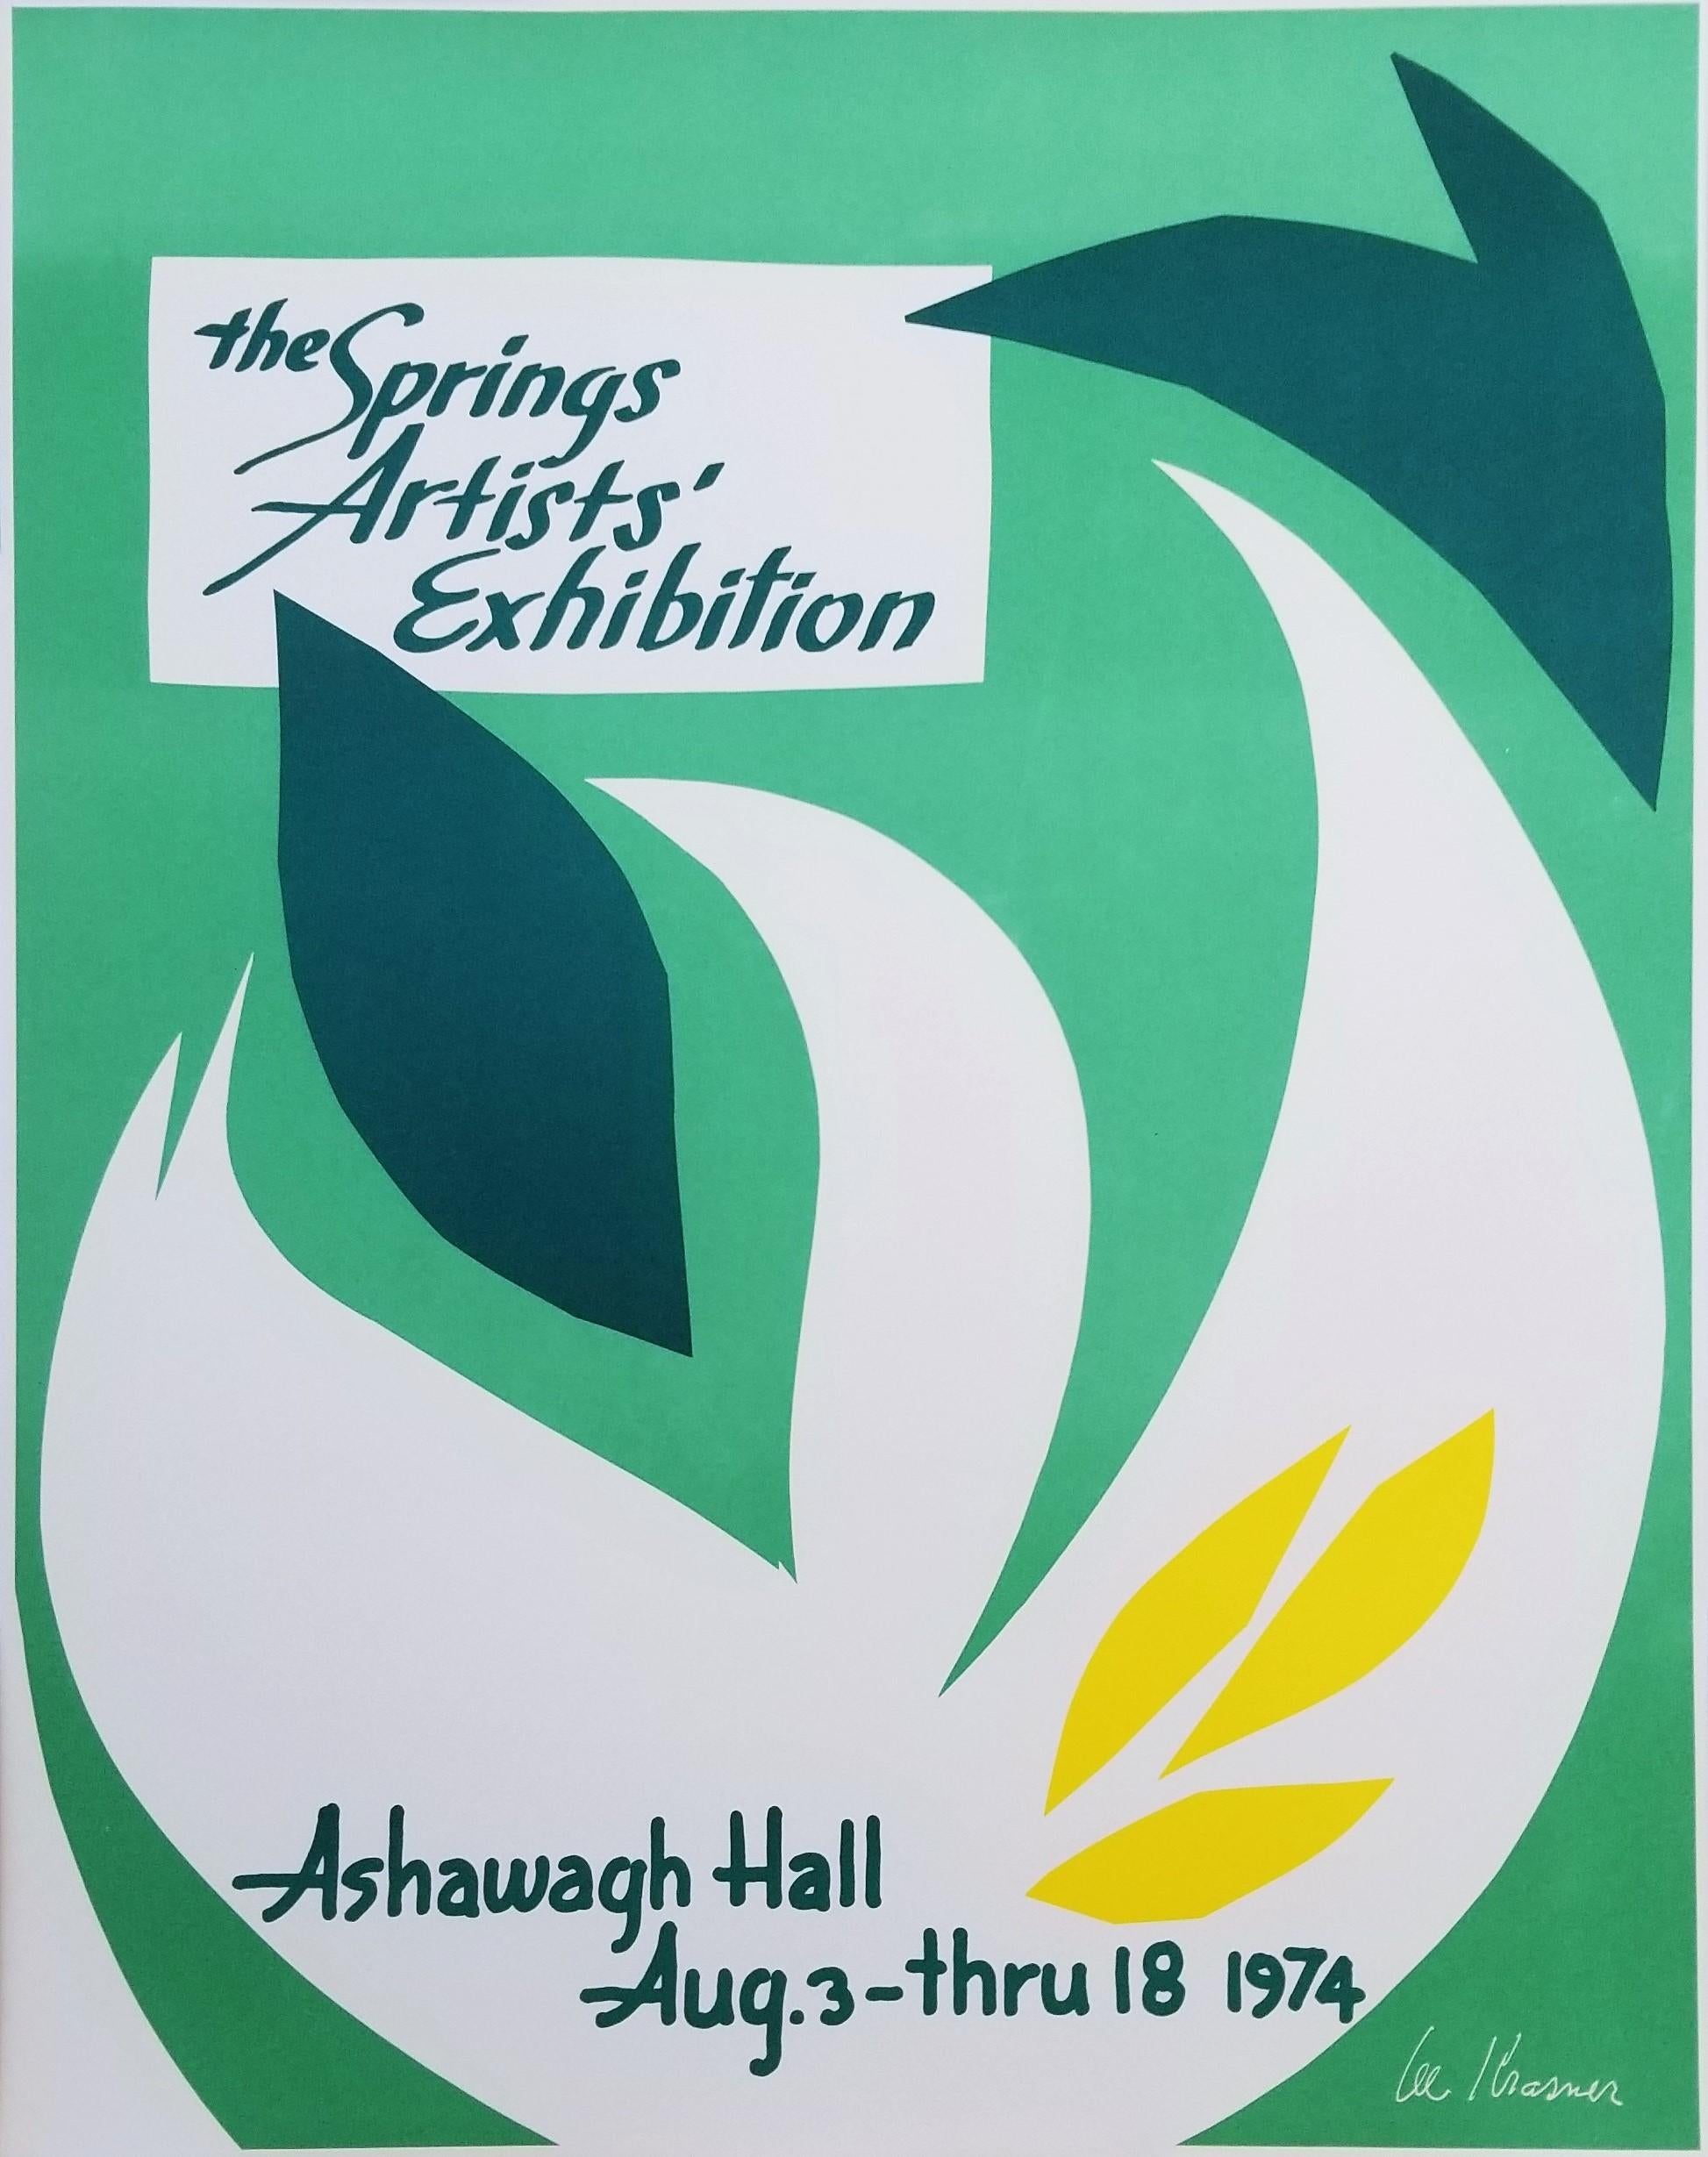 Lee Krasner Abstract Print - Ashawagh Hall: The Springs Artists' Exhibition Poster /// Female Artist Abstract